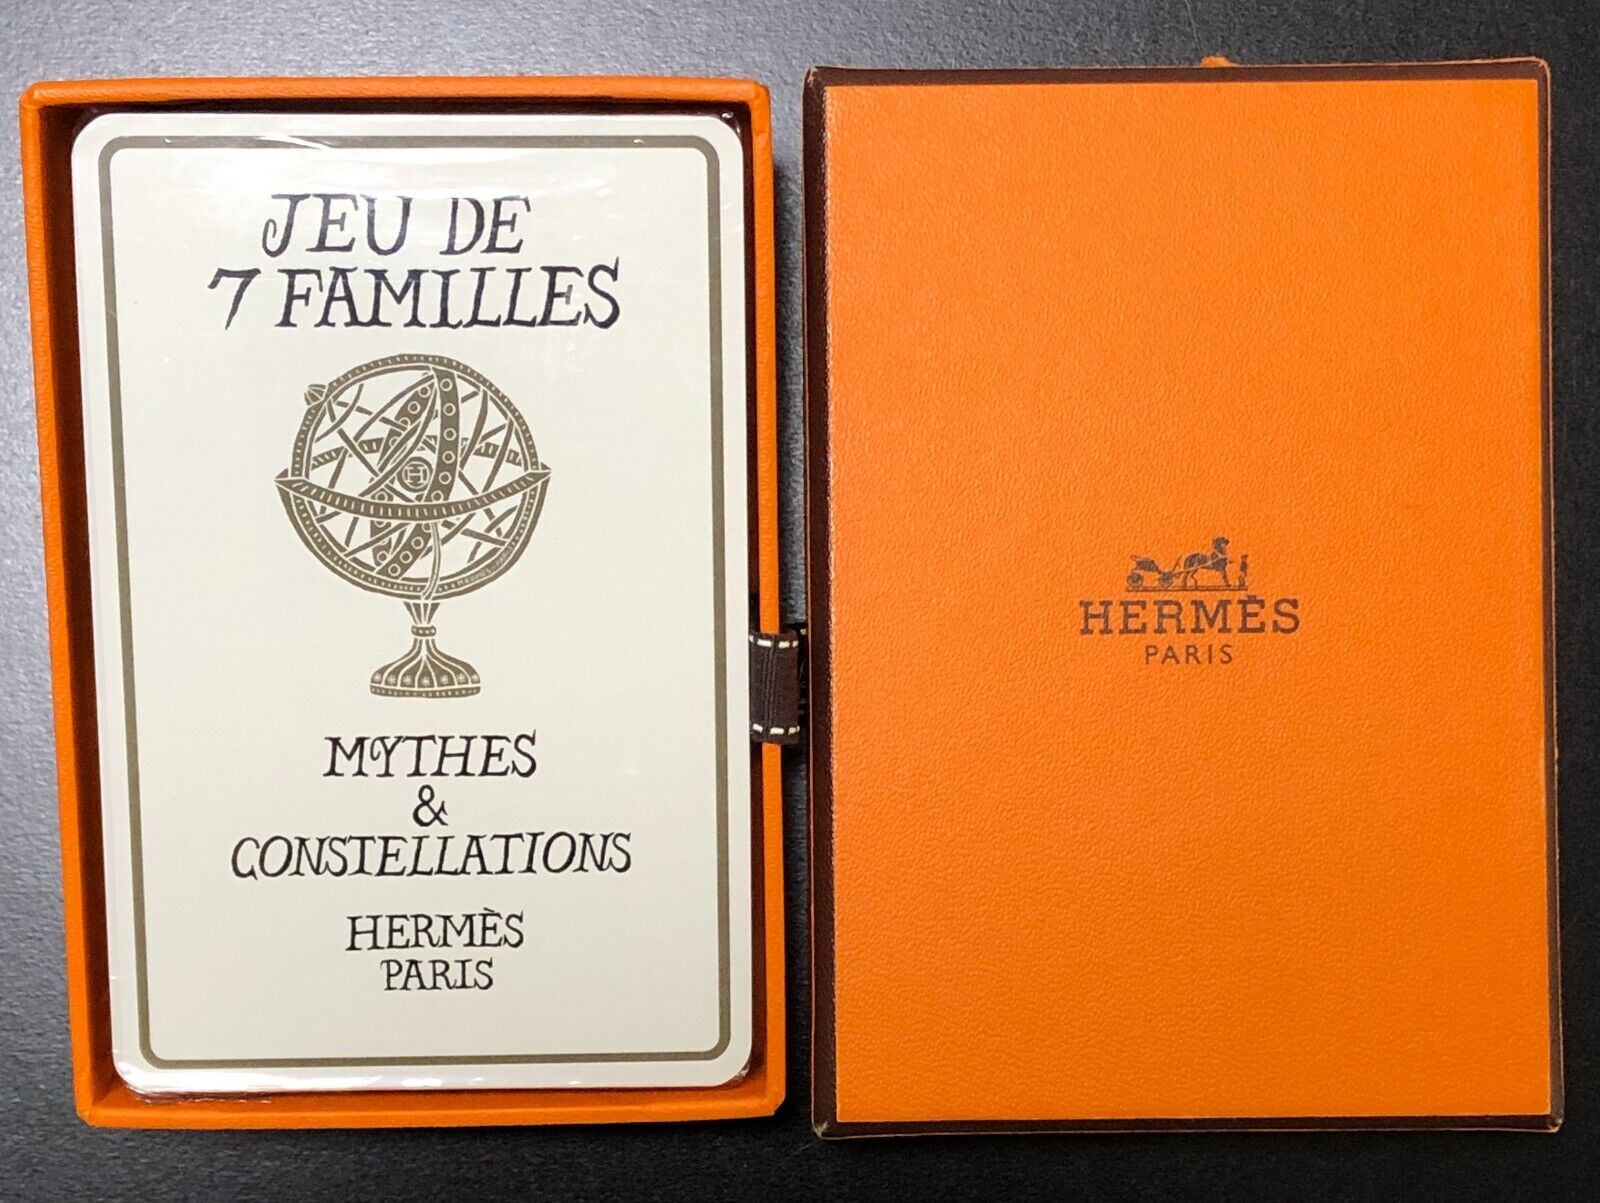 Stored Item HERMES Jeu De 7 Familles Mythes & Constellations Happy Families Game